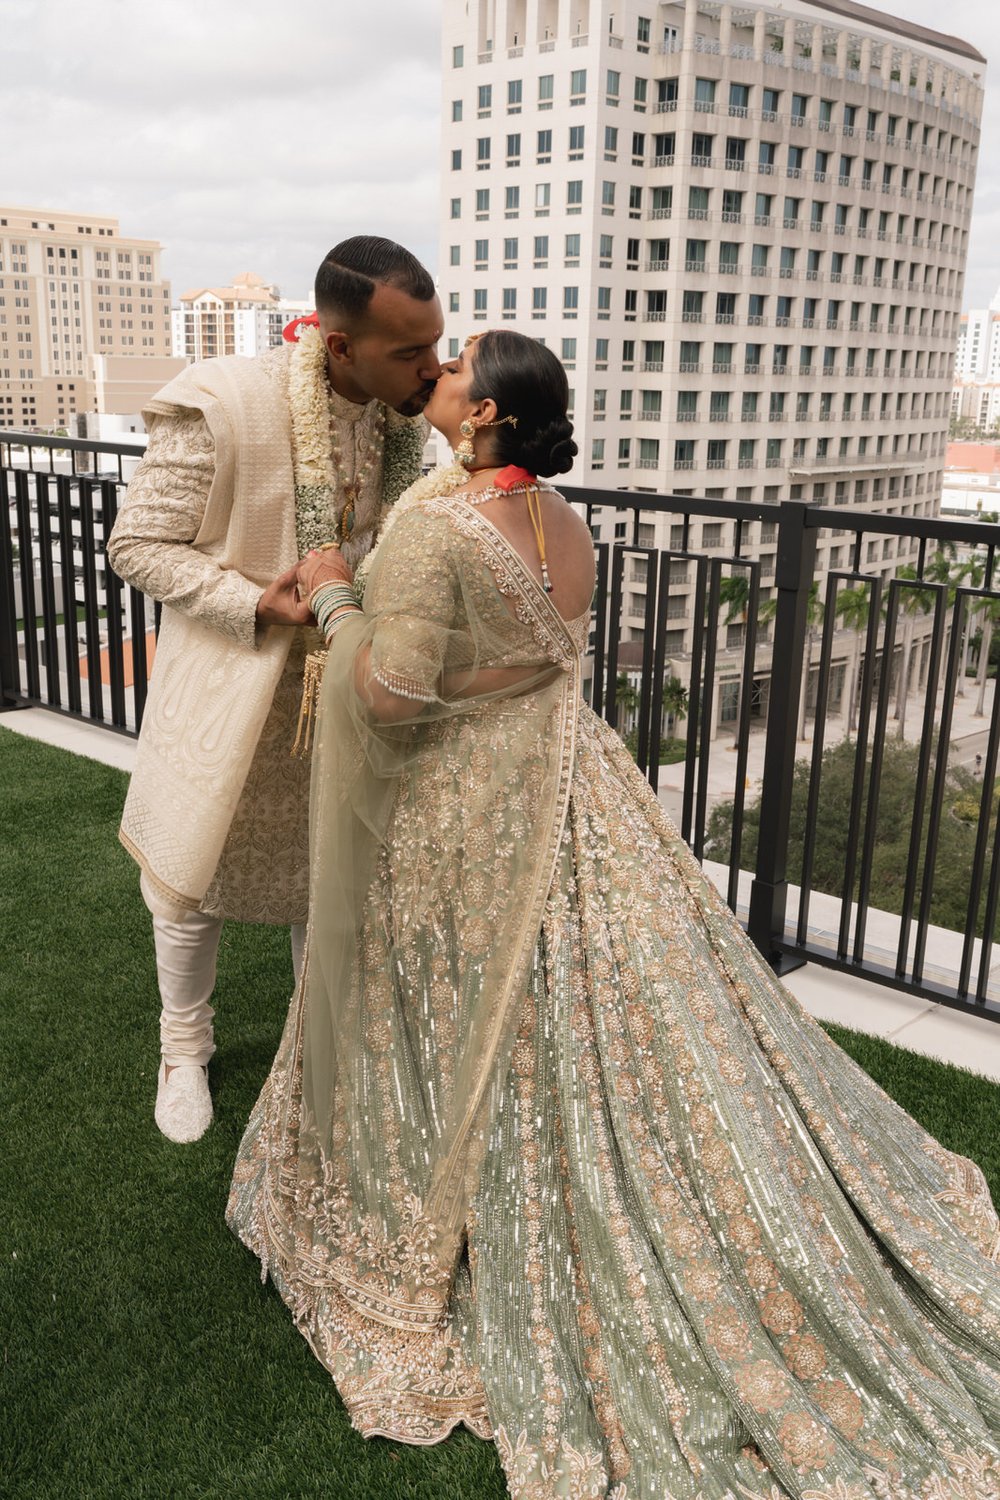 Luxury Indian Wedding in Miami Florida - Indian wedding photographer miami florida - michelle gonzalez photography - loews hotel in coral gables wedding-86.jpg